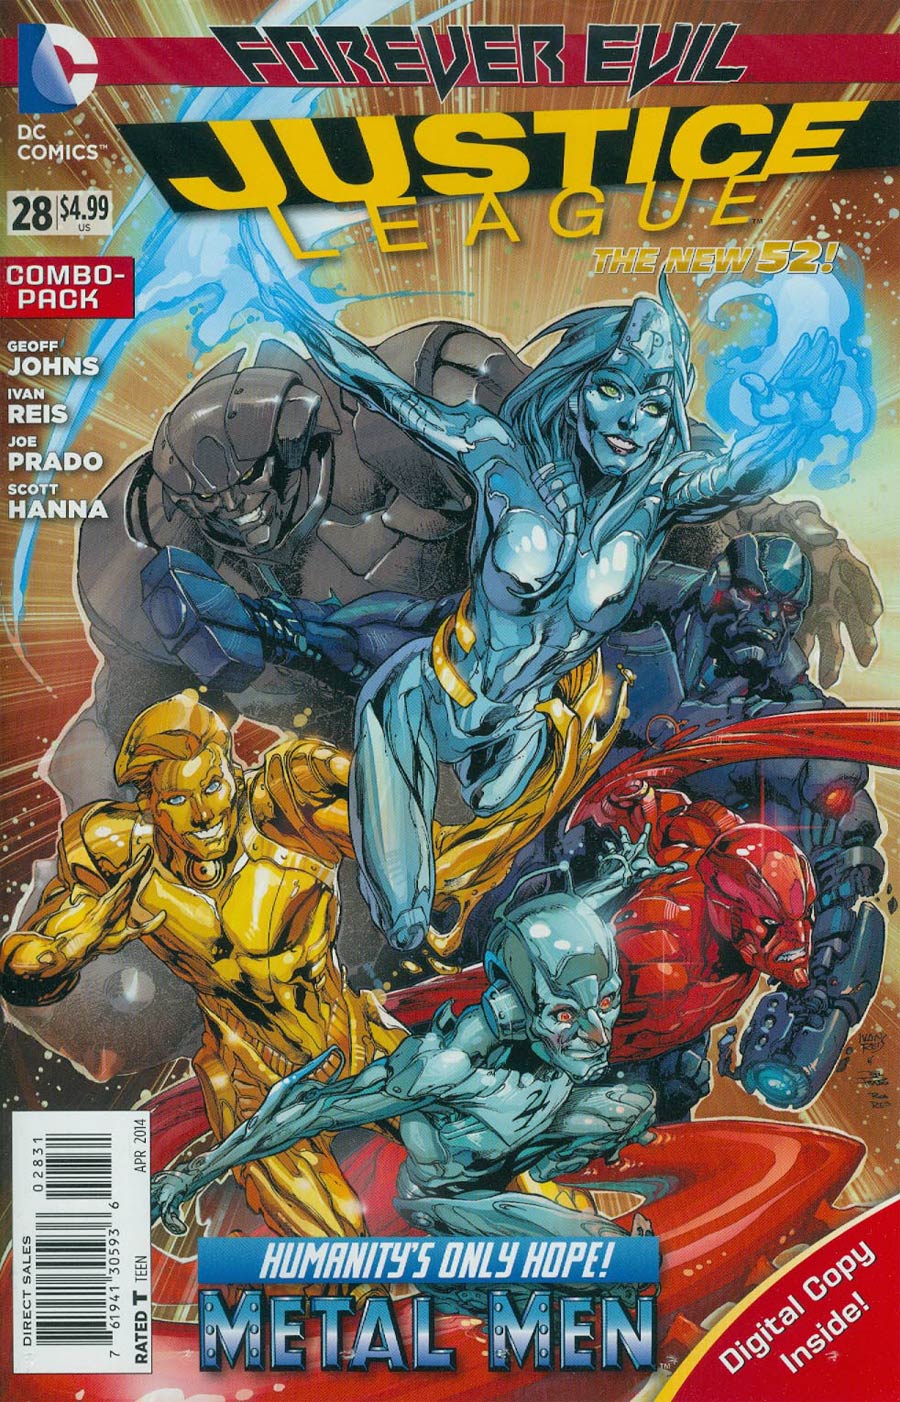 Justice League Vol 2 #28 Cover B Combo Pack With Polybag (Forever Evil Tie-In)